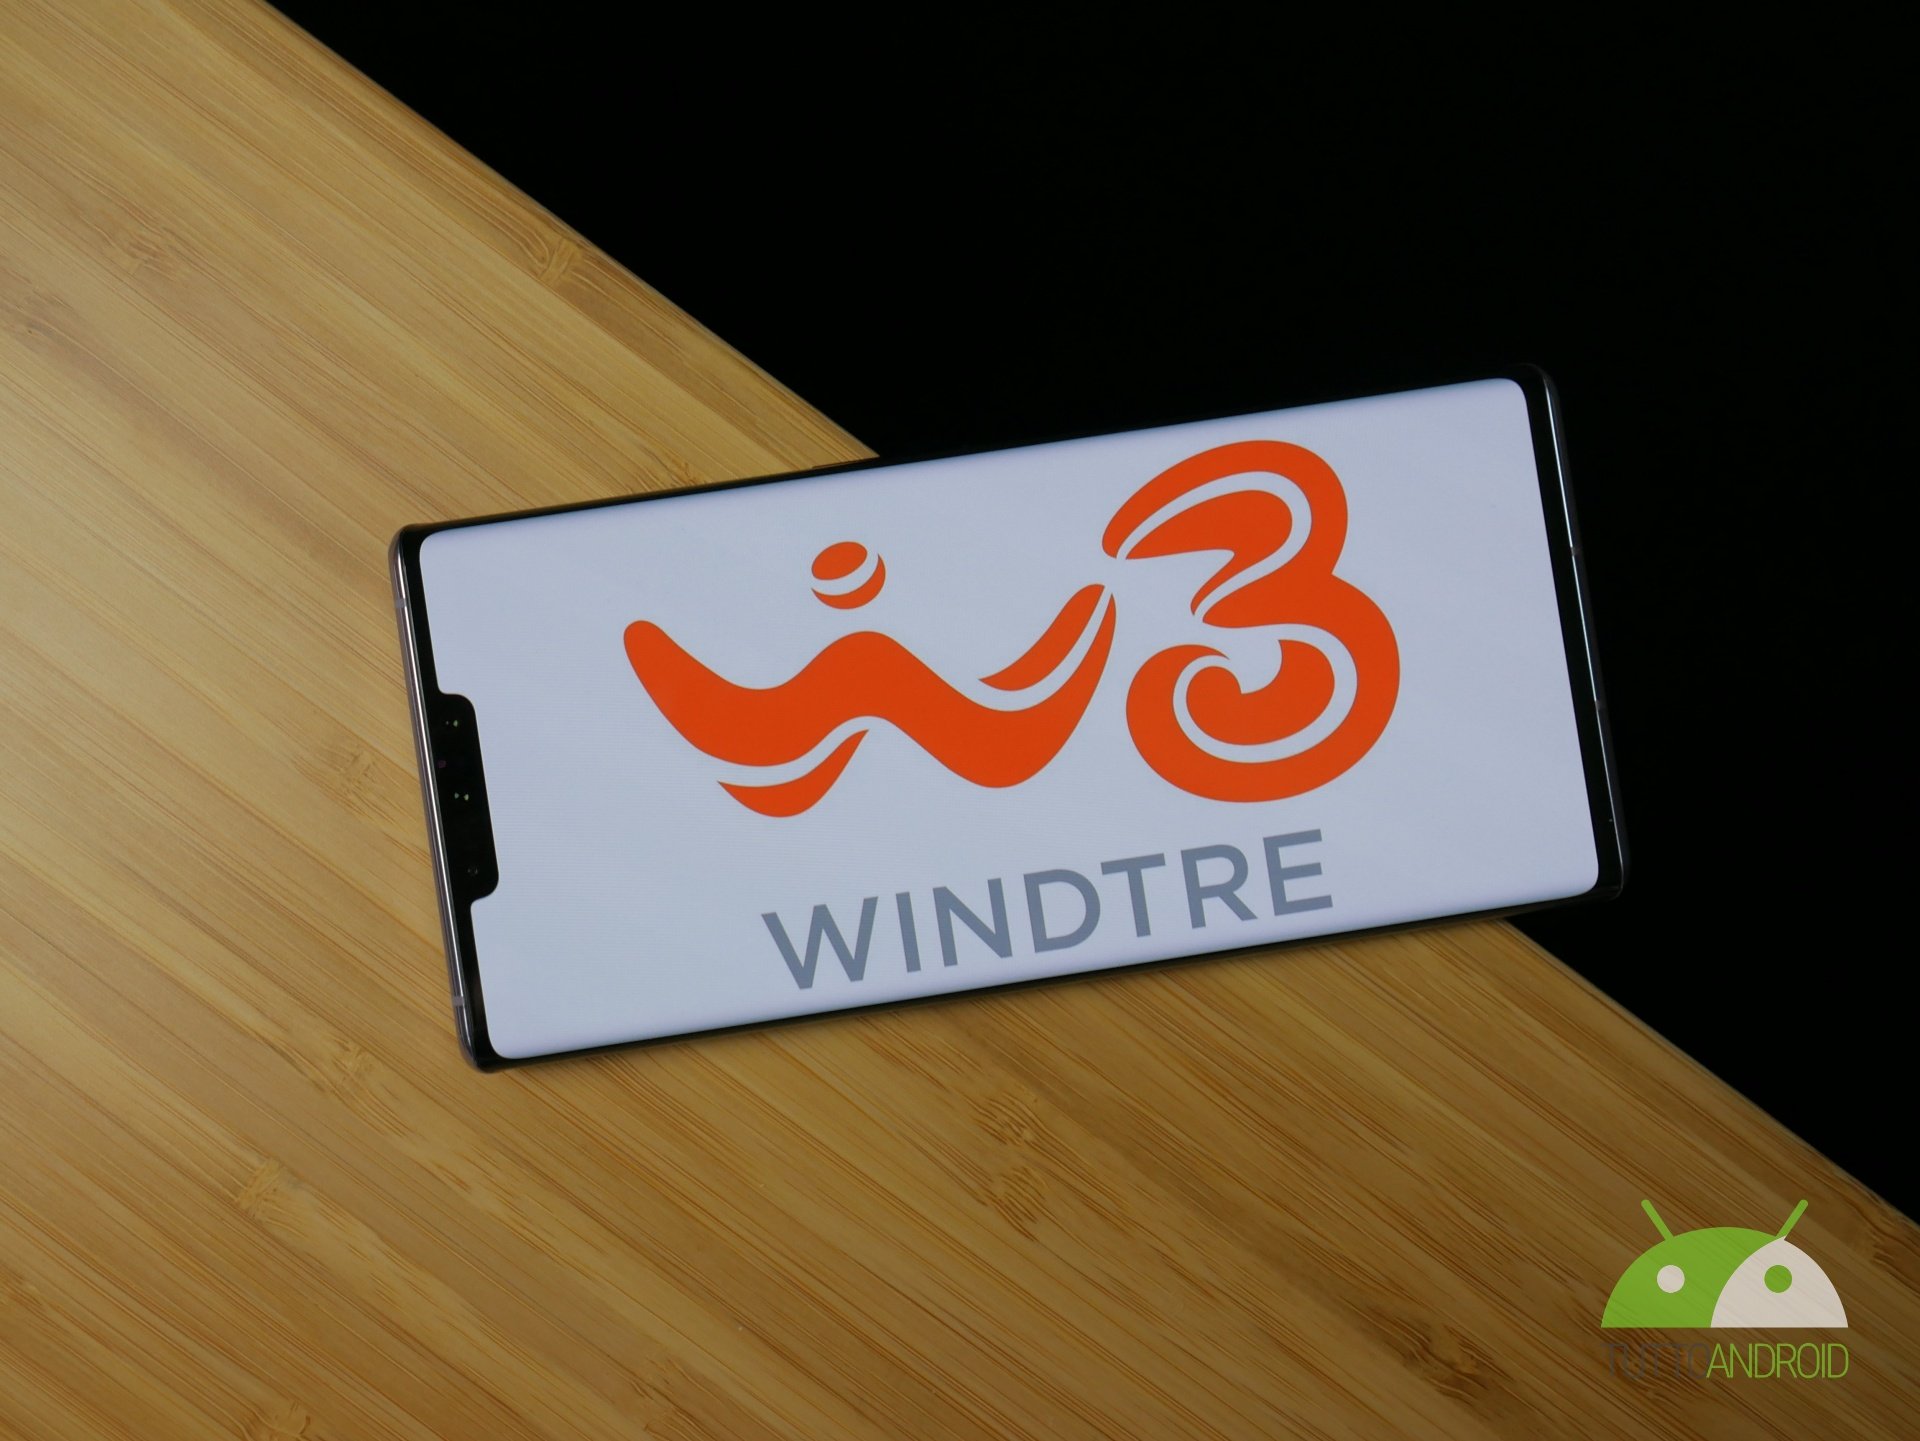 WINDTRE now allows reuse of the QR code for eSIM activation